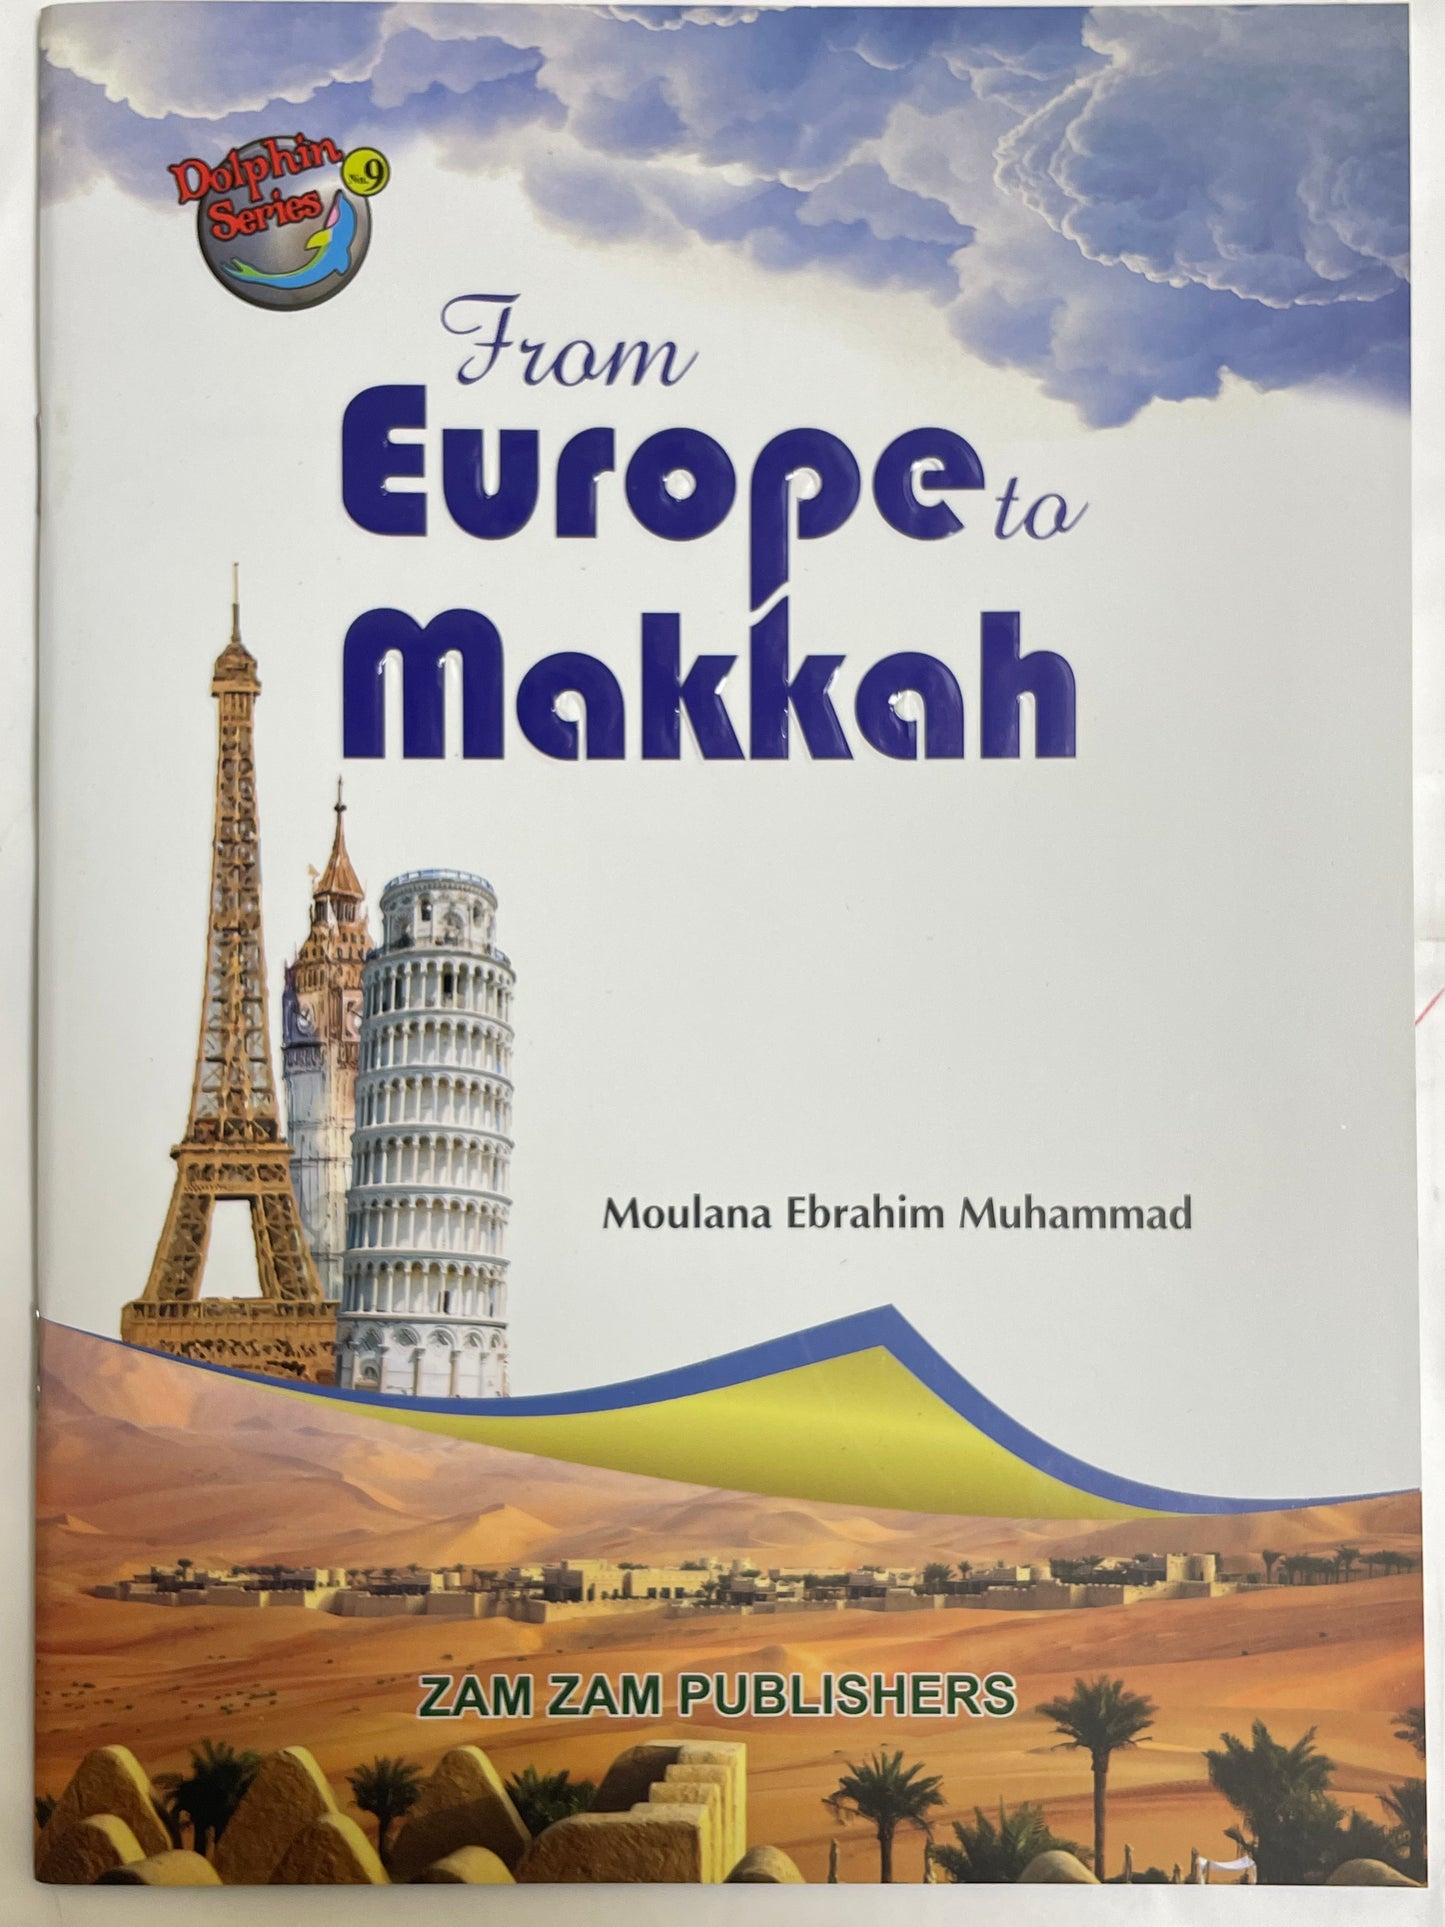 From Europe to Makkah